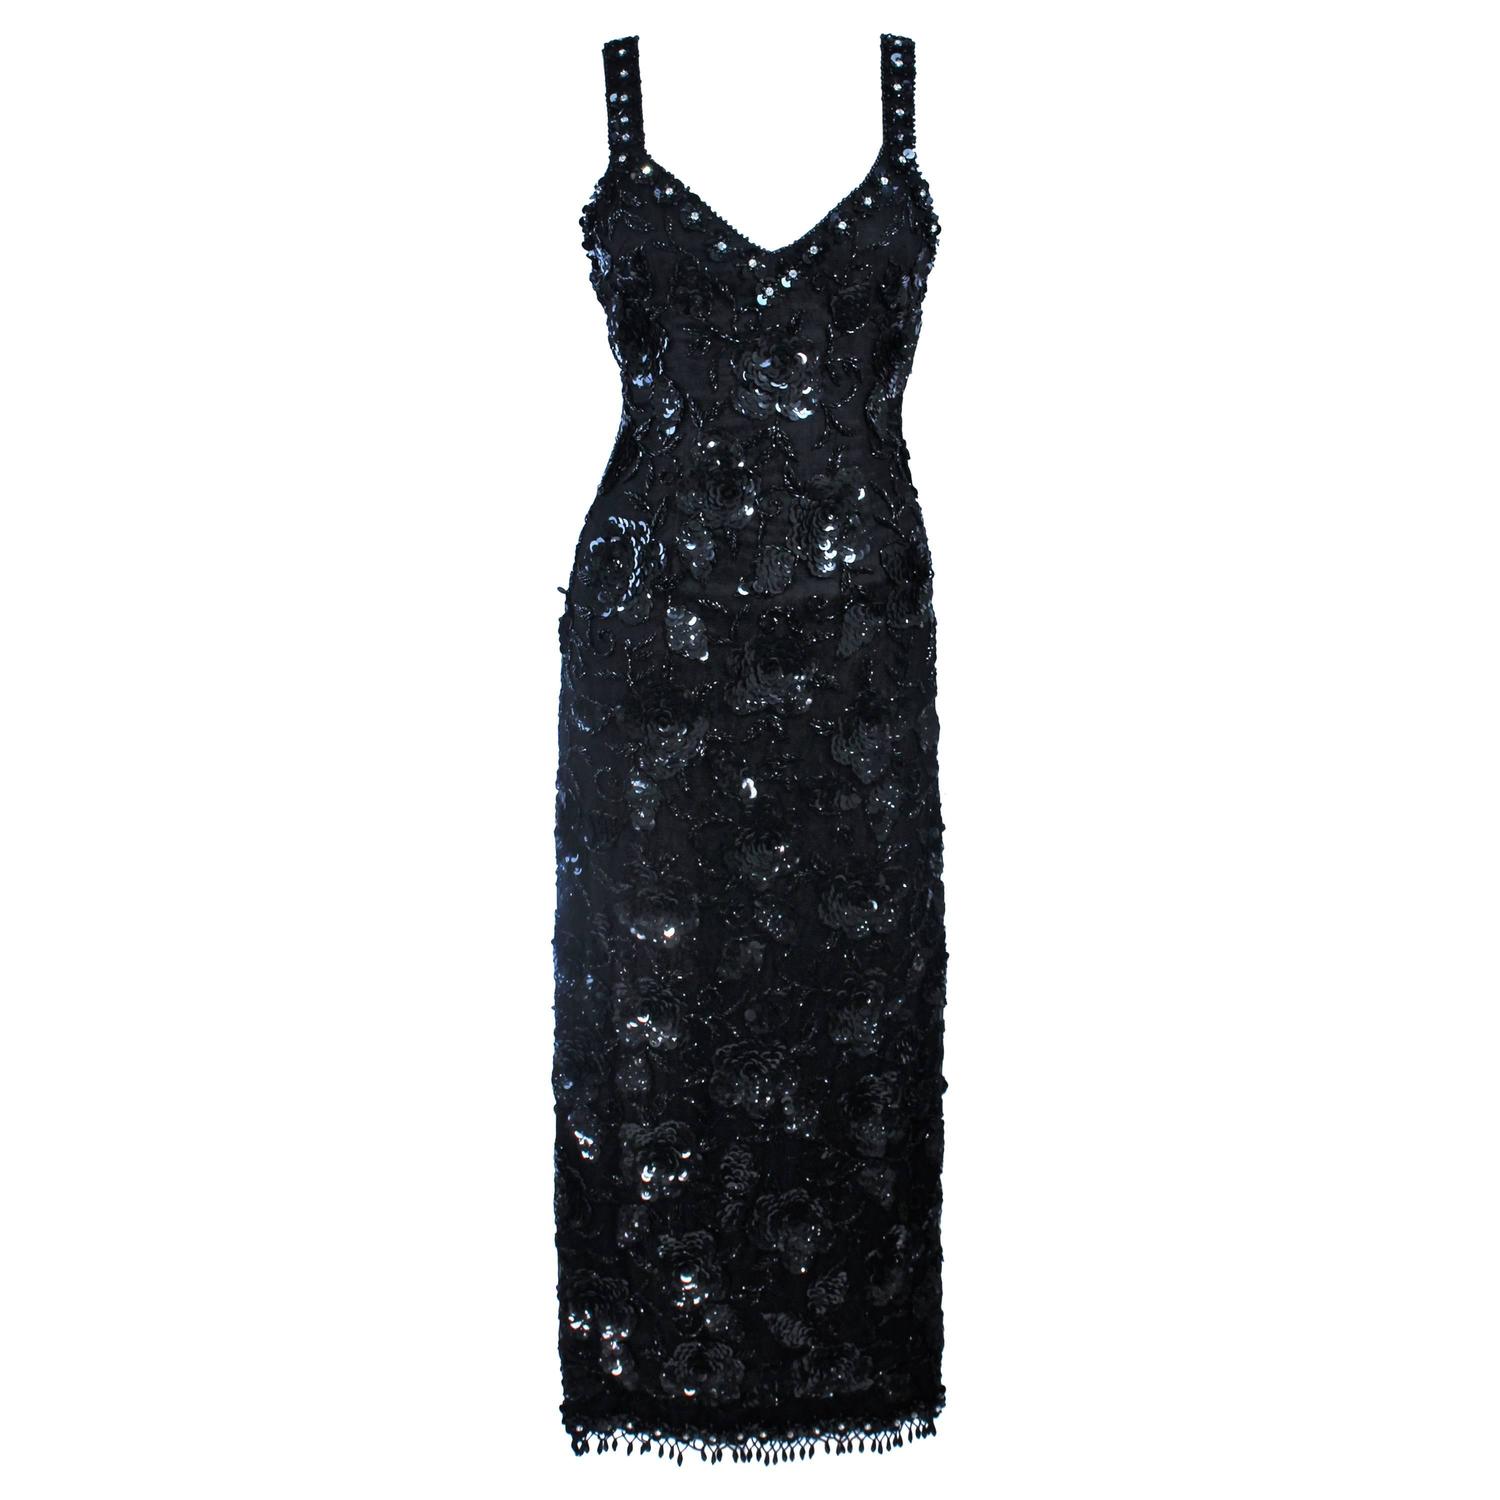 Vintage 1950's Black Floral Beaded Gown Size 8 For Sale at 1stdibs